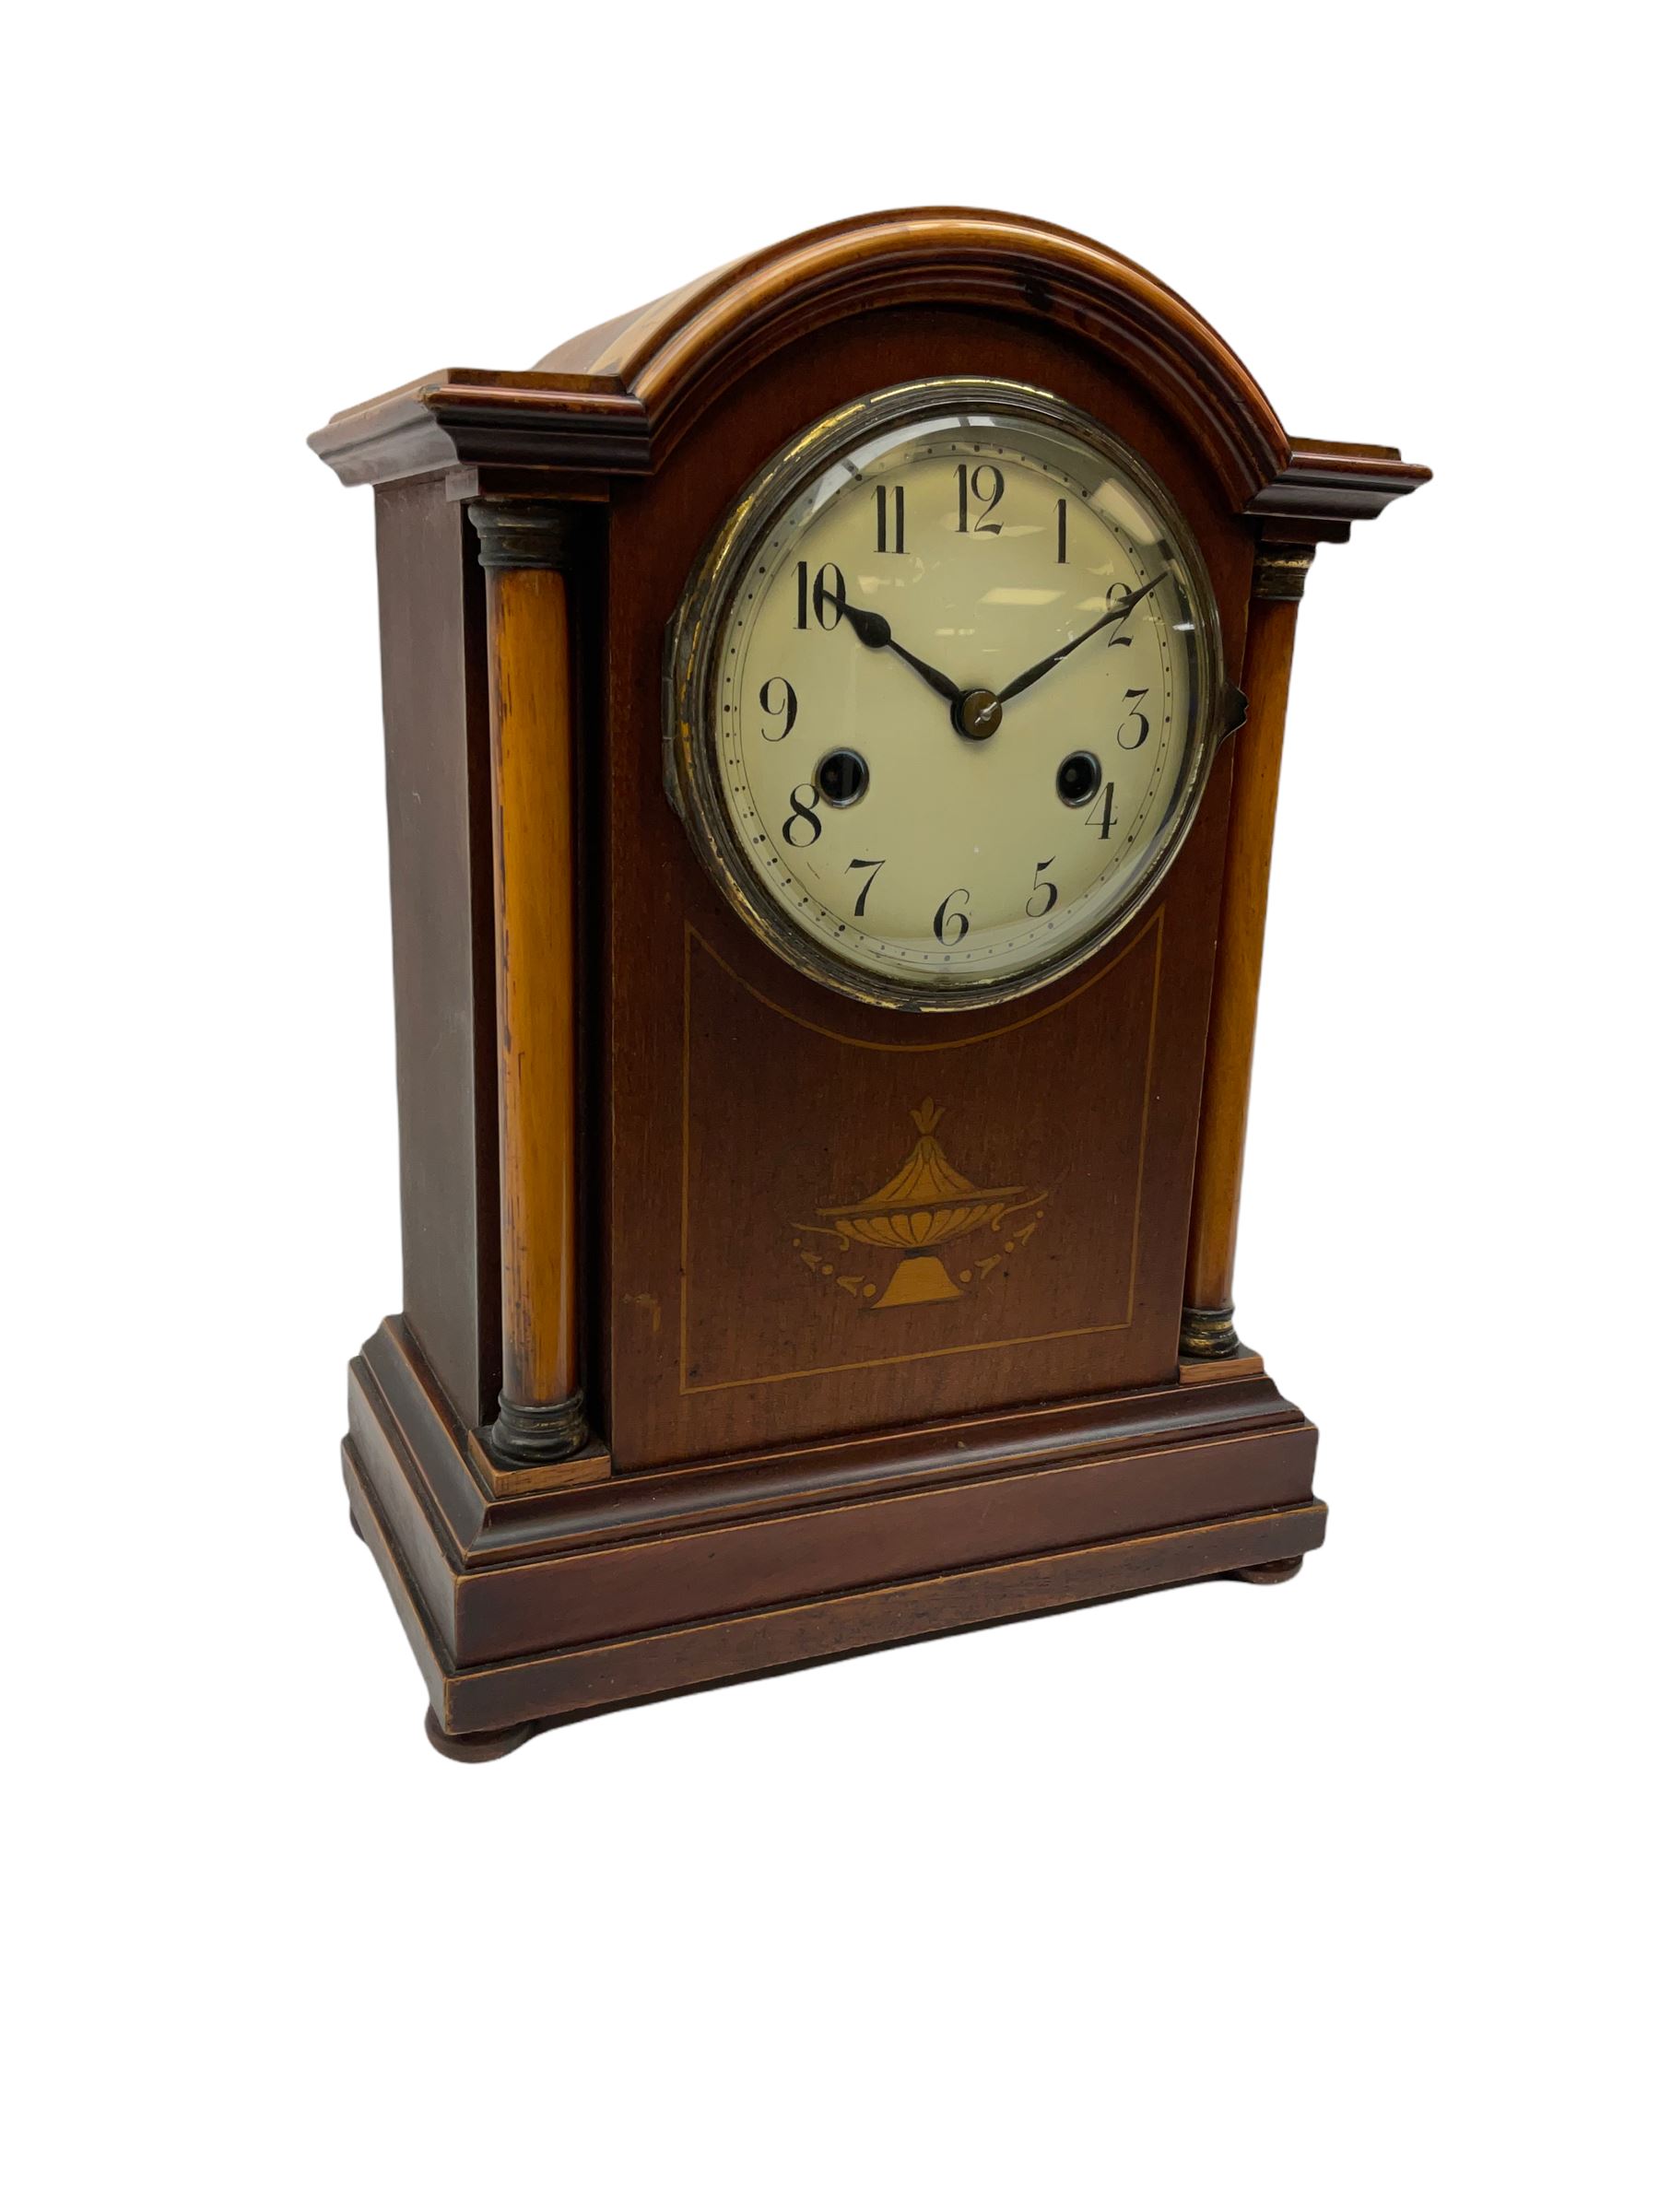 An early 20th century mantle clock in a mahogany case with a break arch pediment